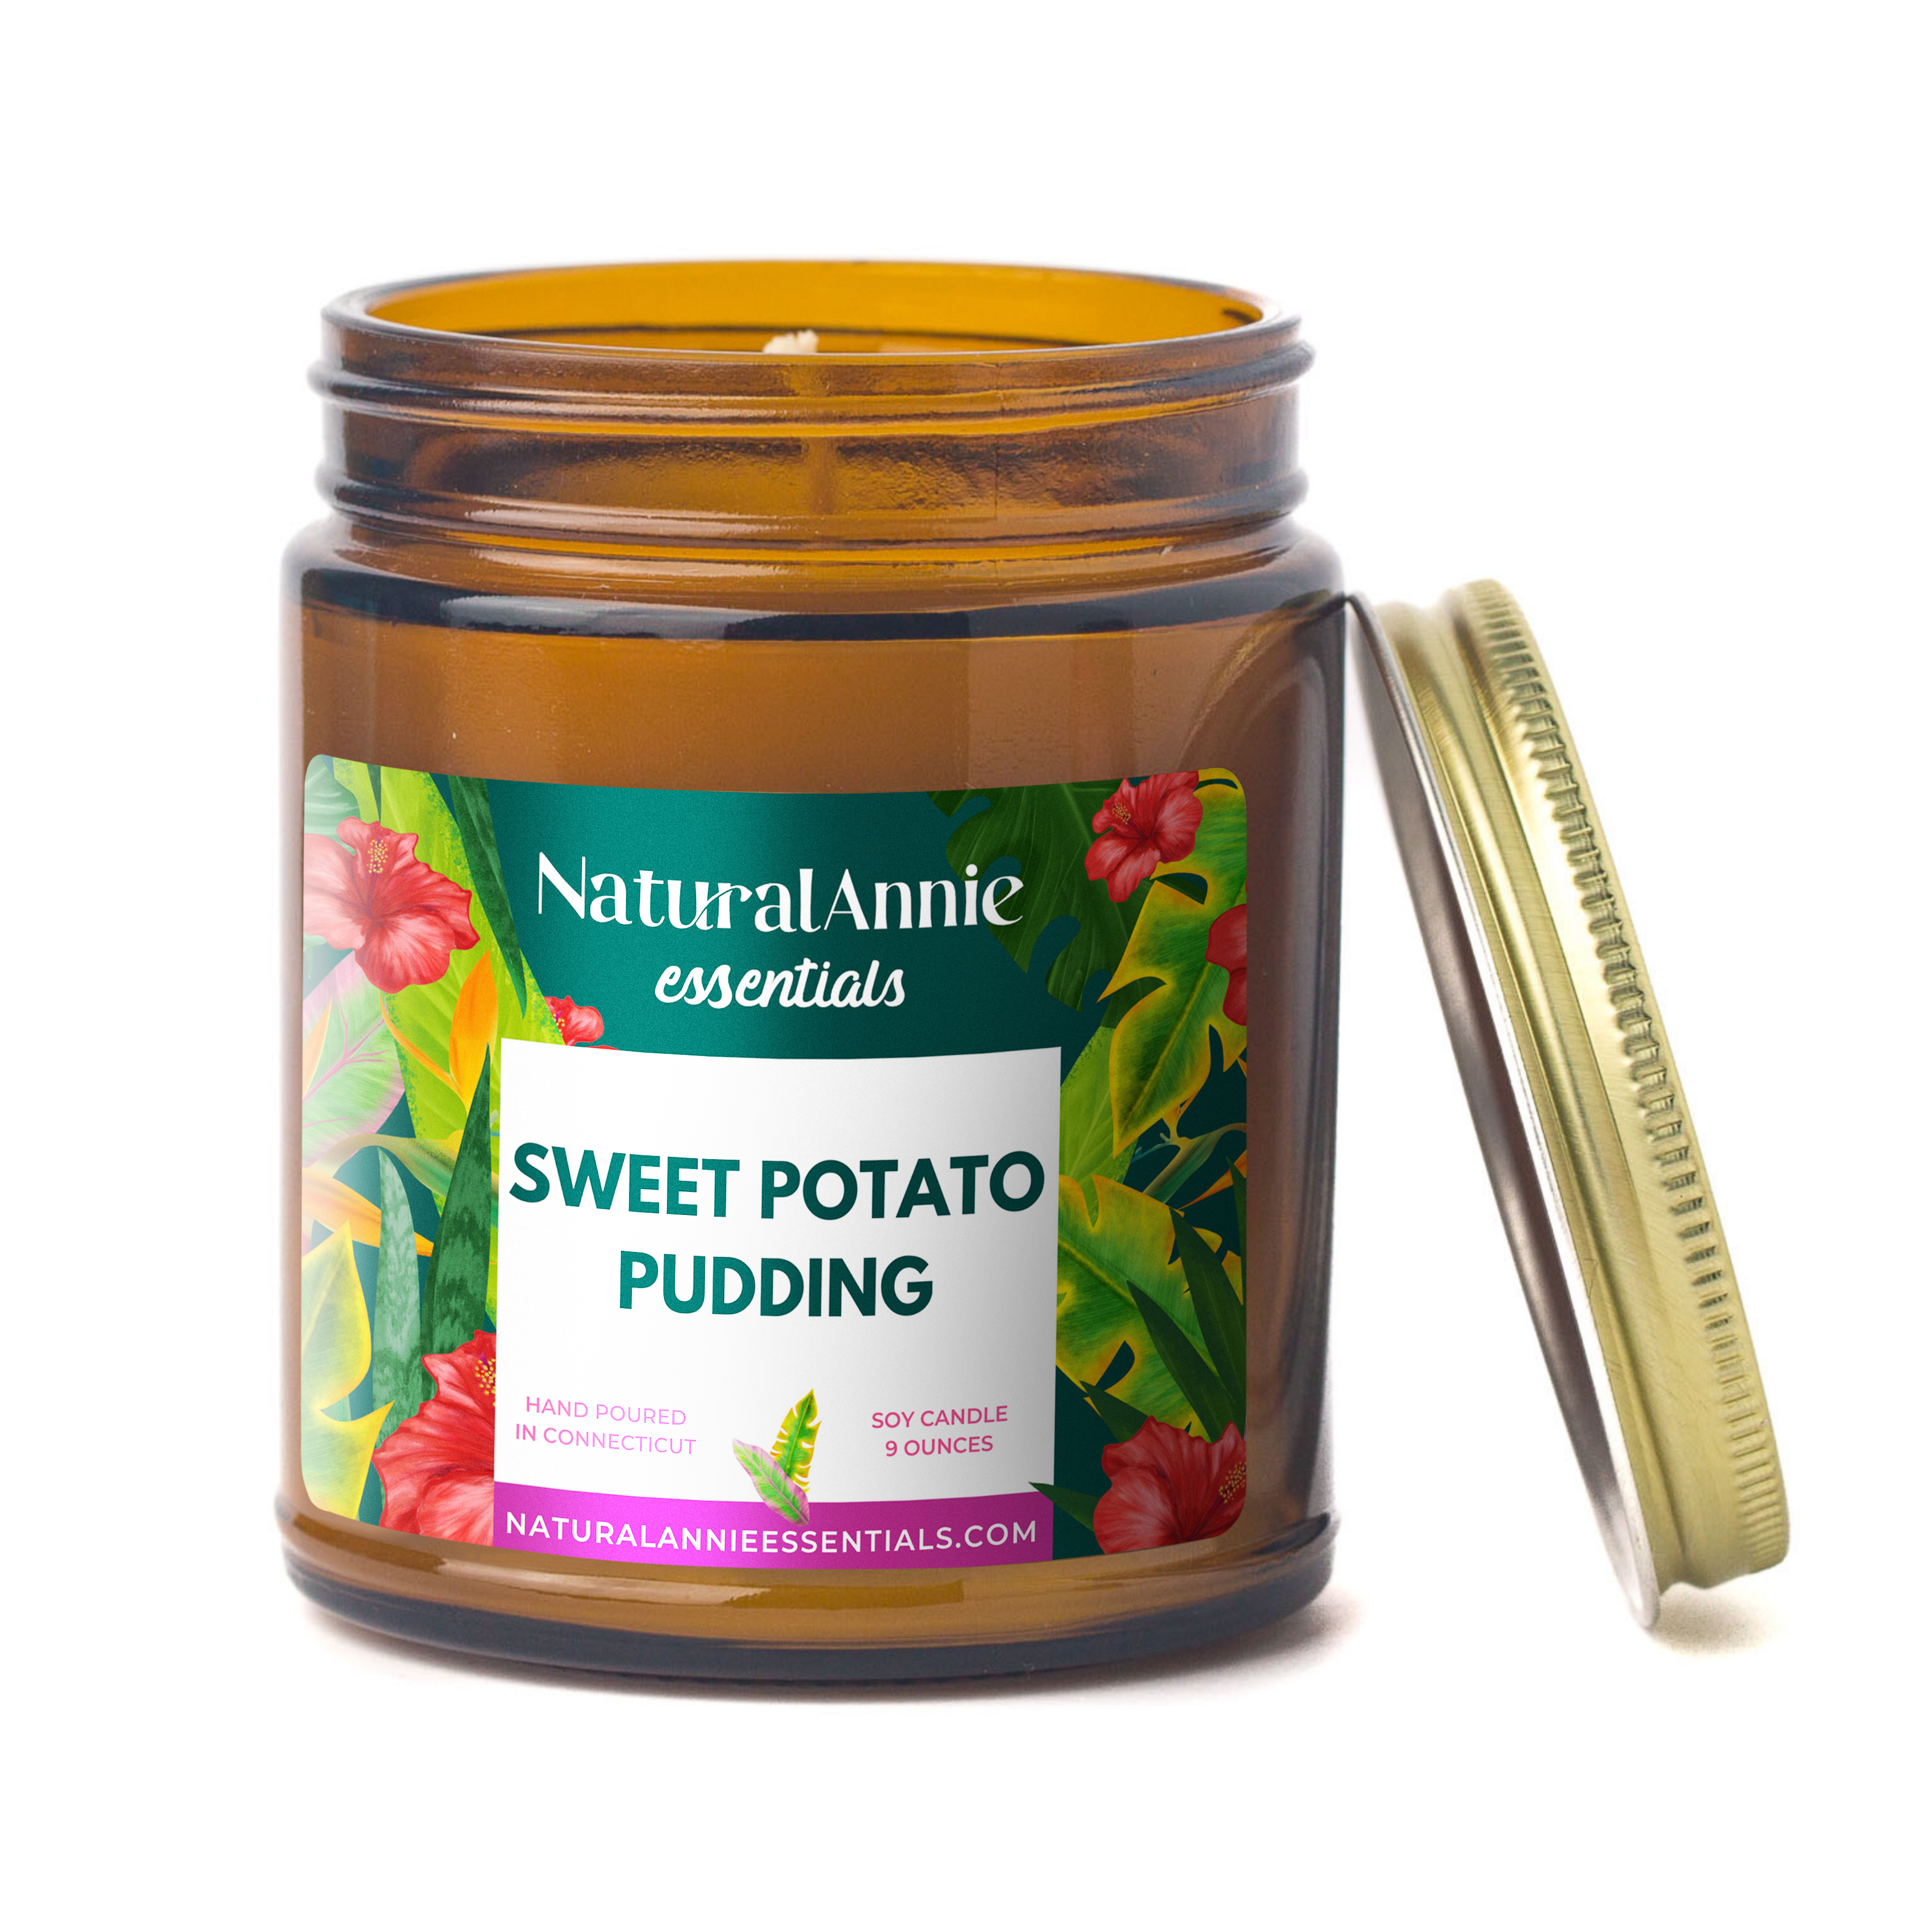 Sweet potato pudding 9 oz Scented Soy Candle